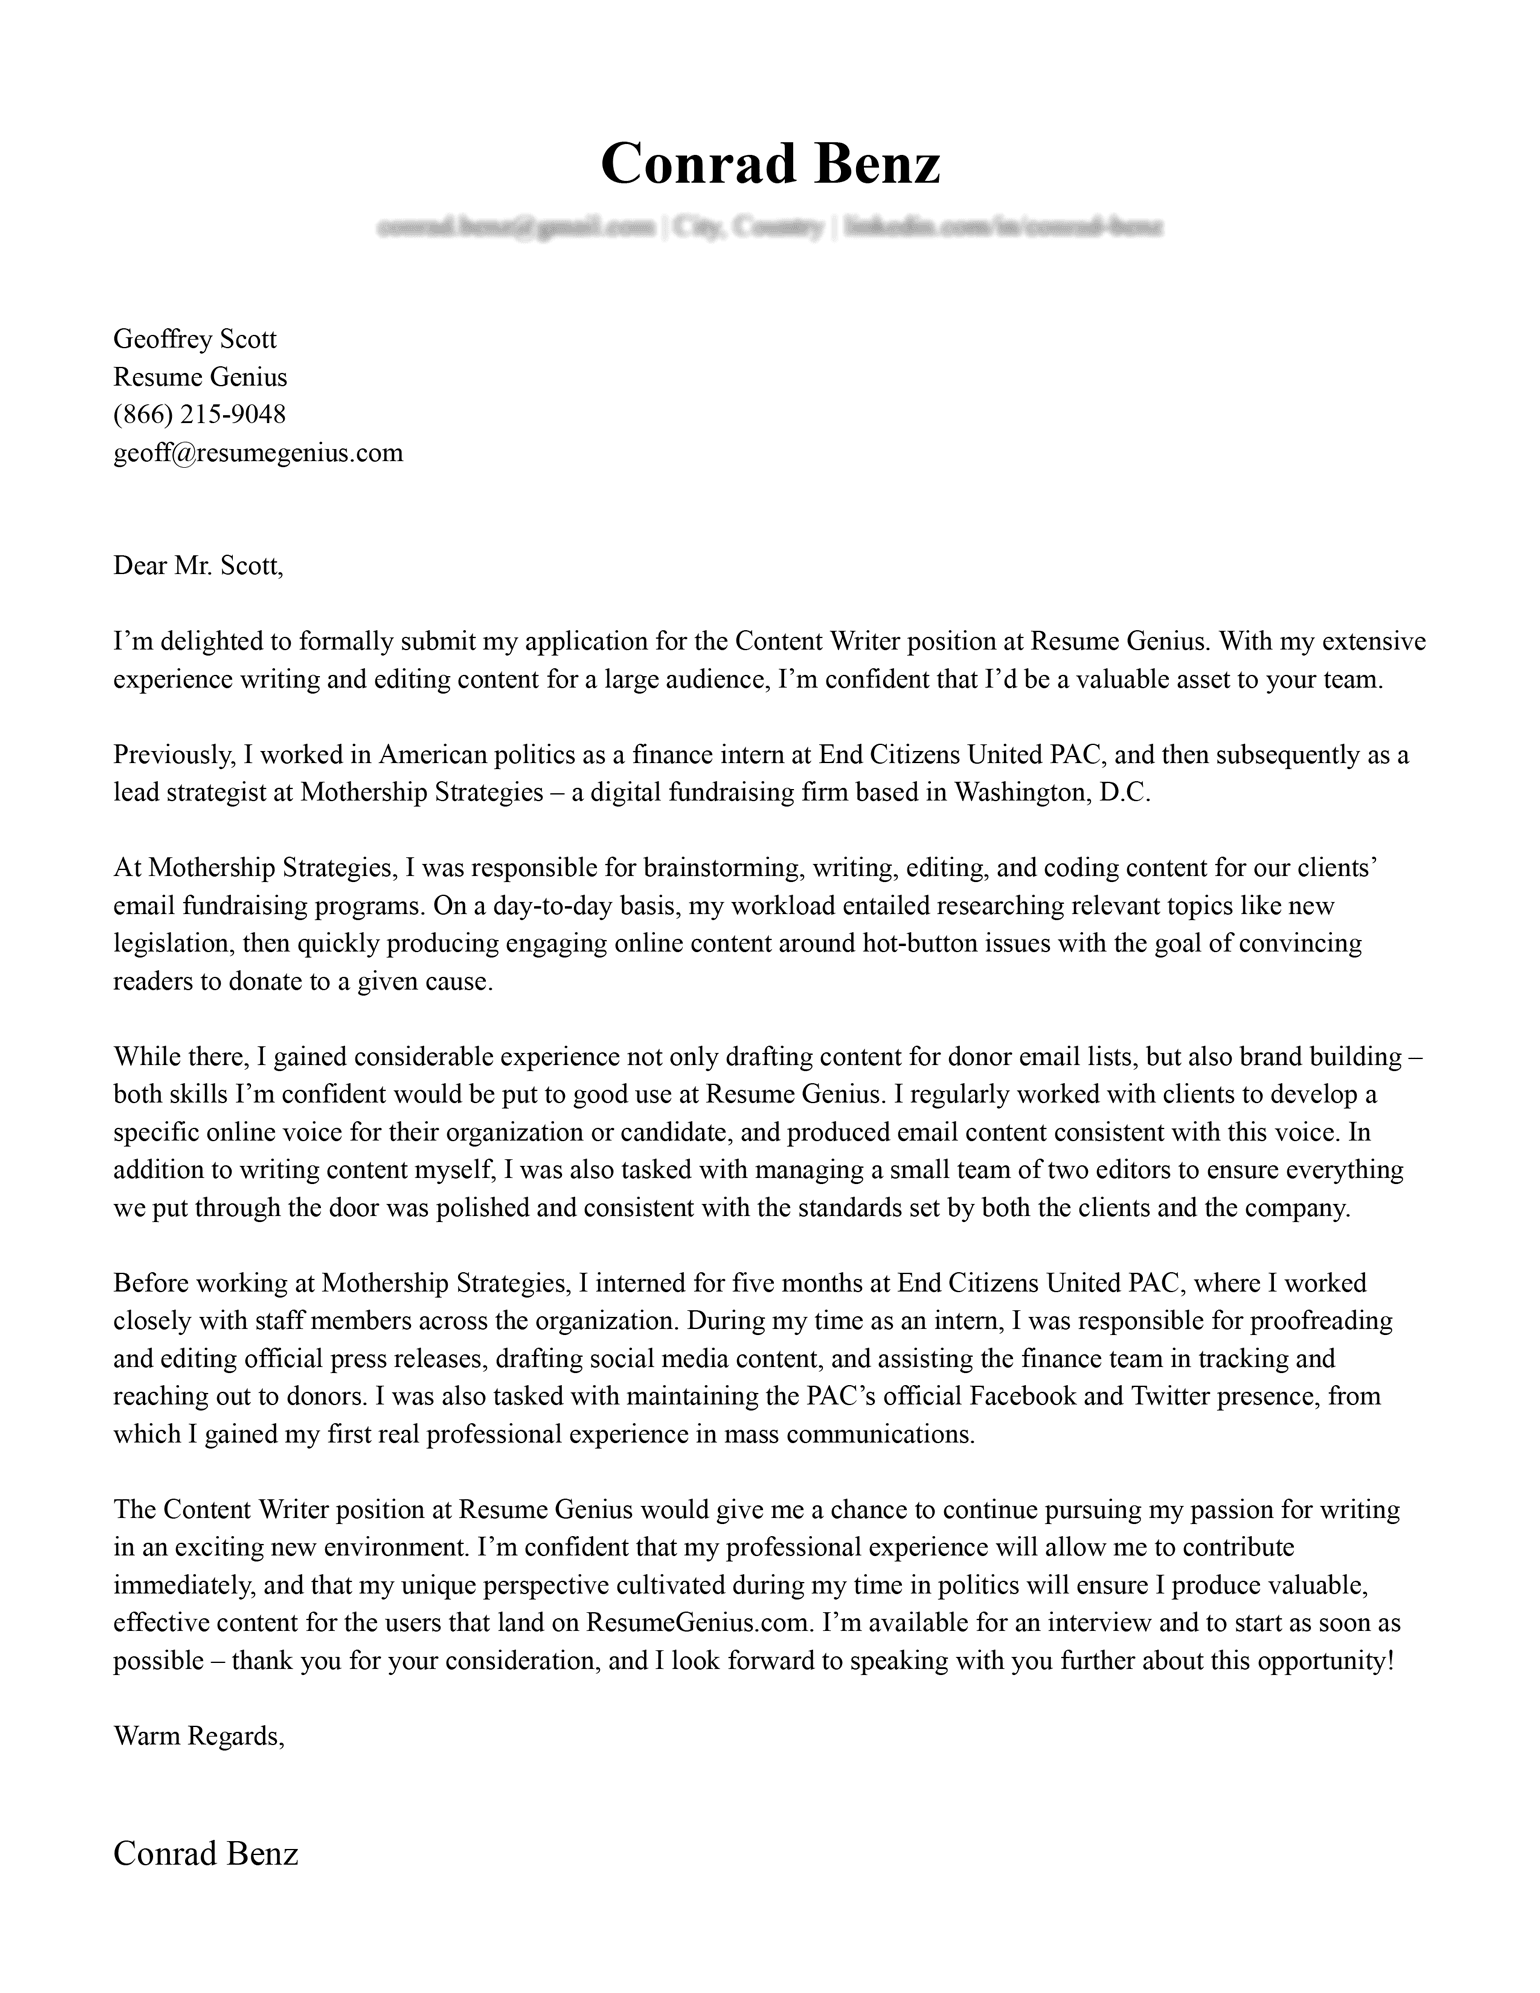 Example of a successful cover letter that landed a job.